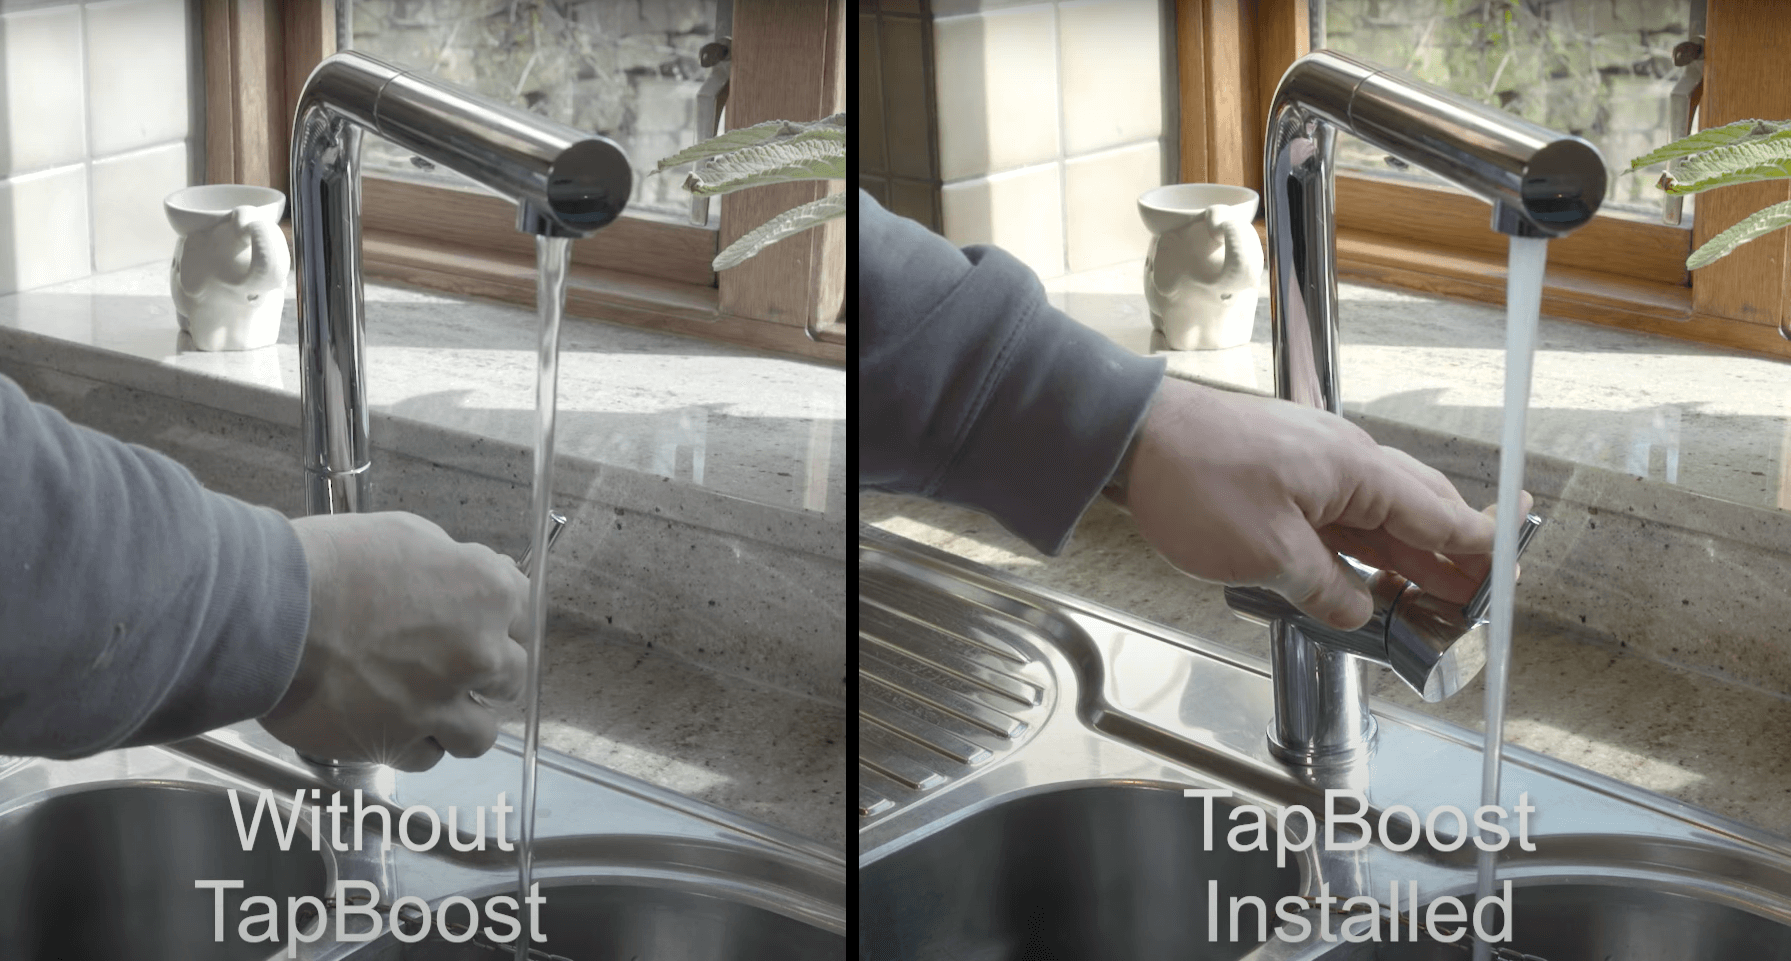 TapBoost Installation case study KAS Energy Plumbing and Heating